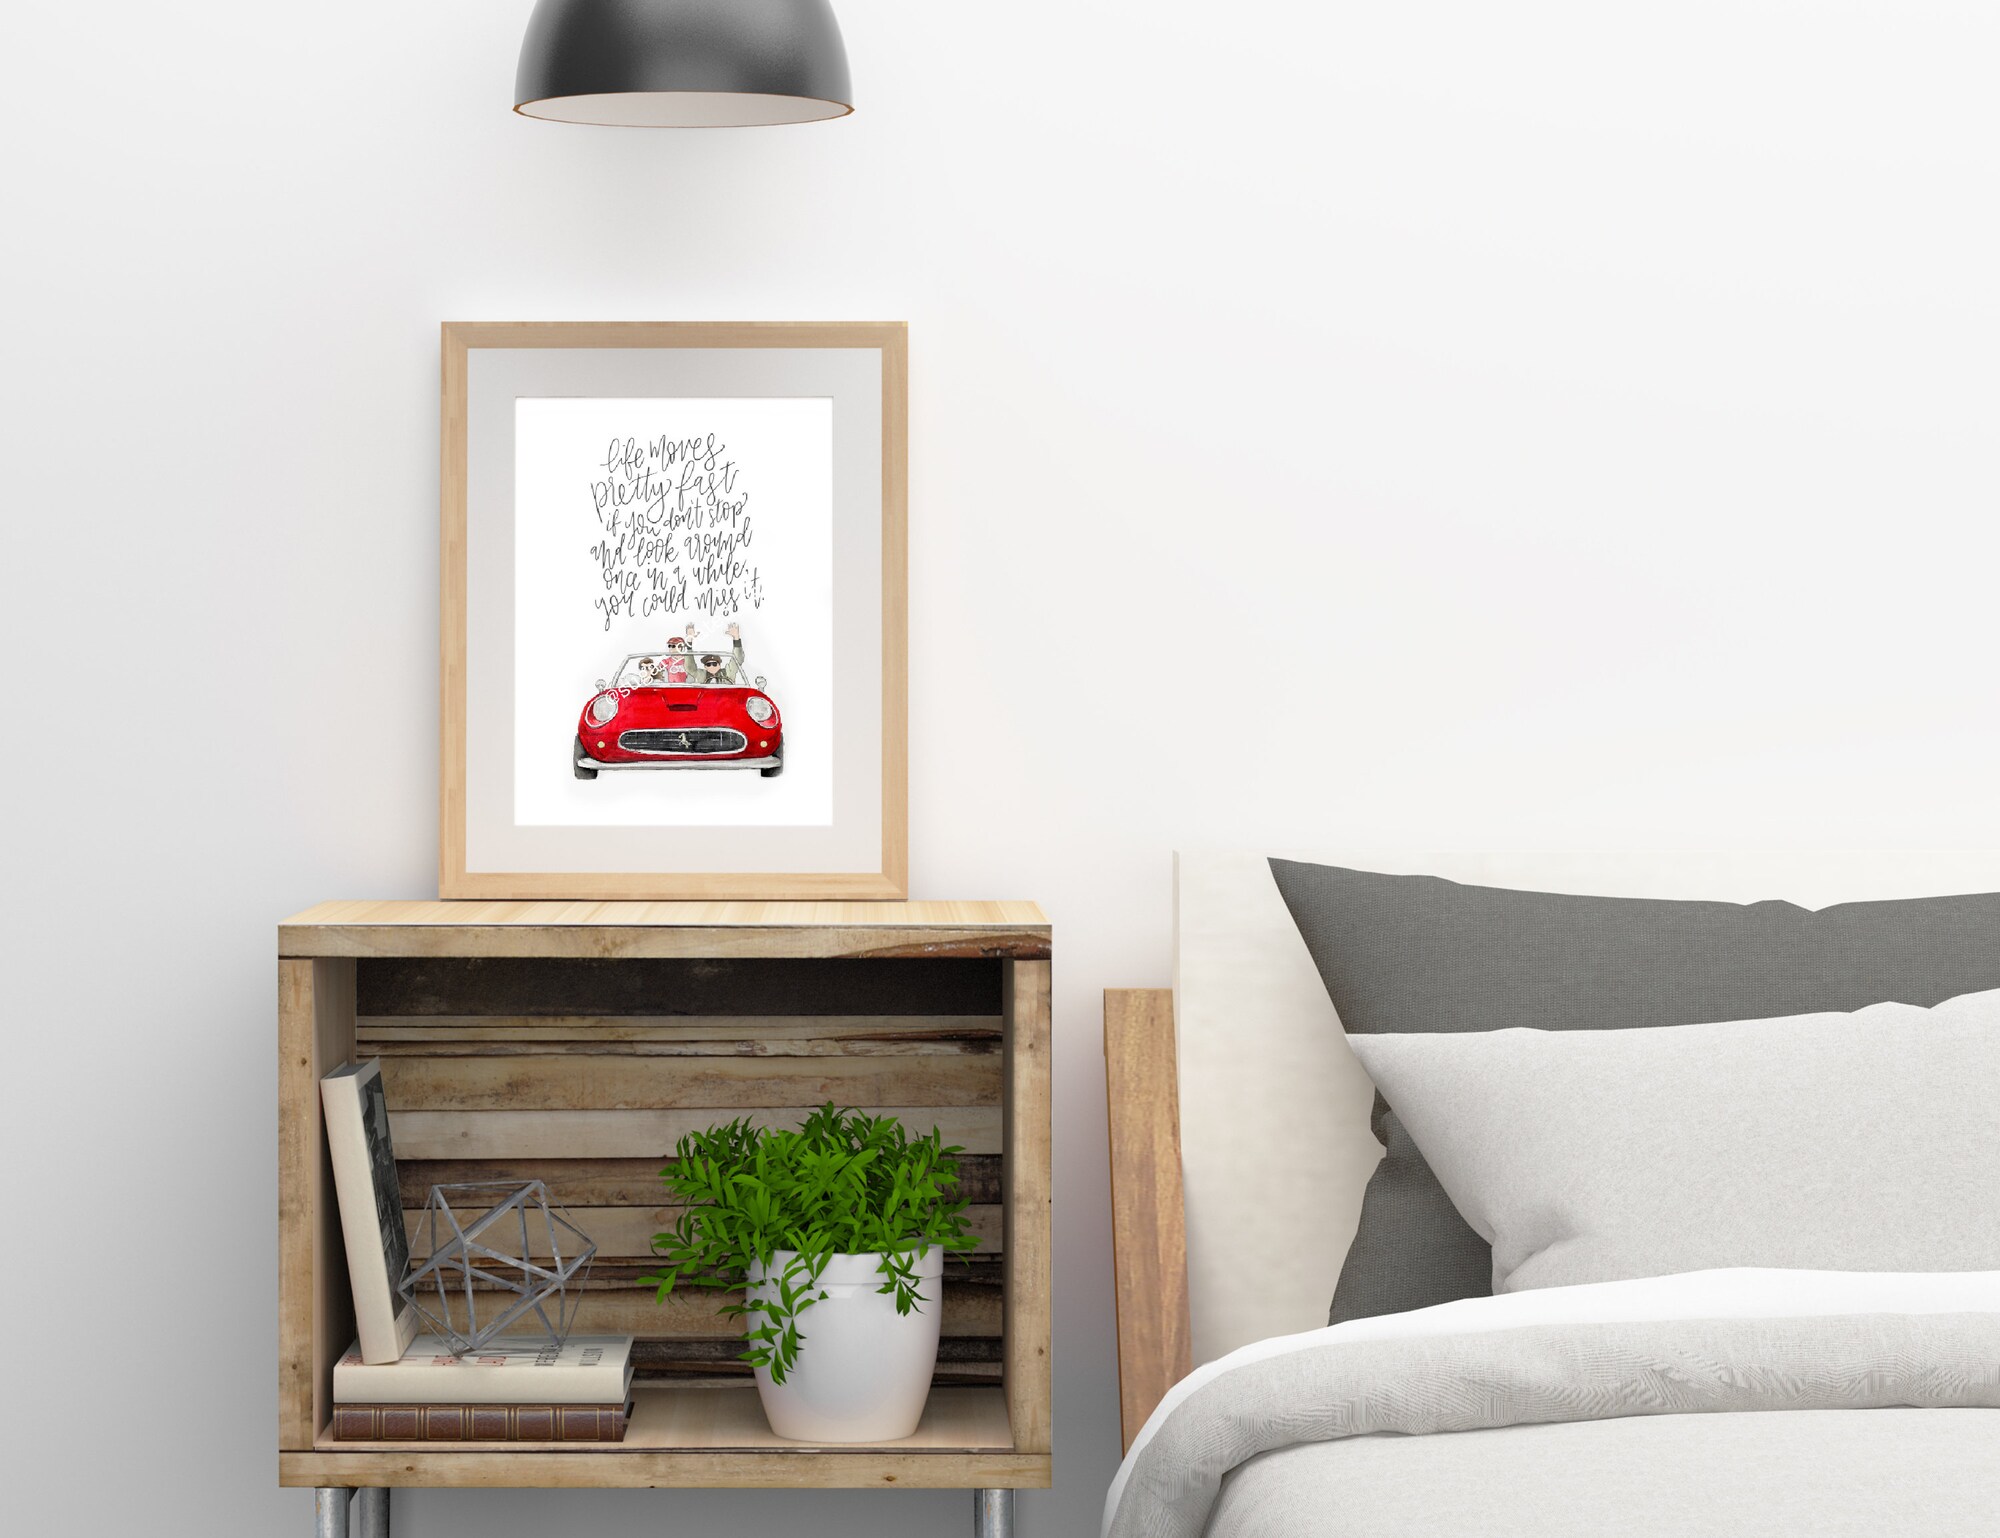 Ferris Buellers day off watercolor print, Ferris Bueller quote, living life quote, movie print